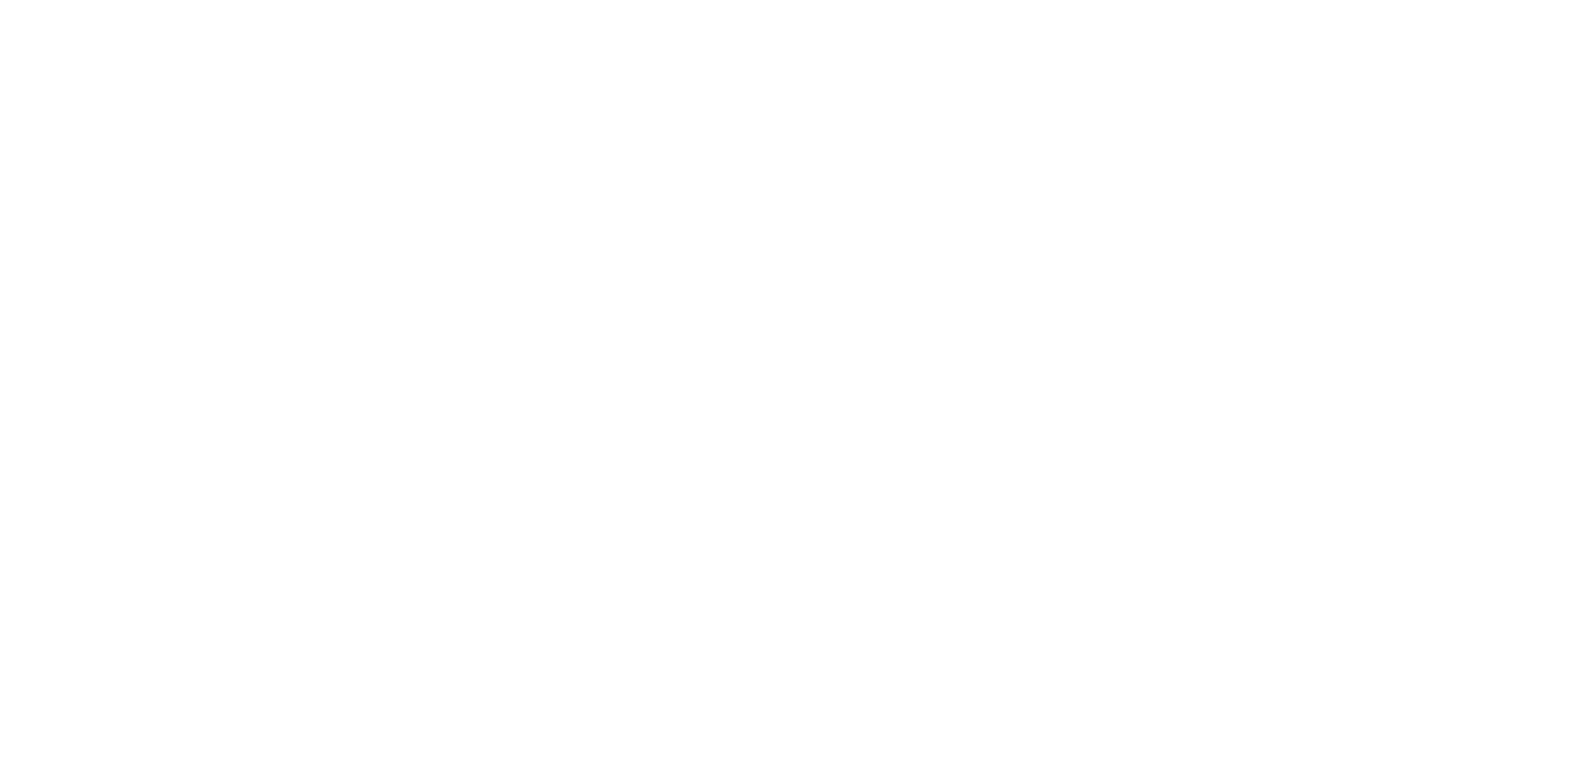 Li Ning Company logo in transparent PNG and vectorized SVG formats